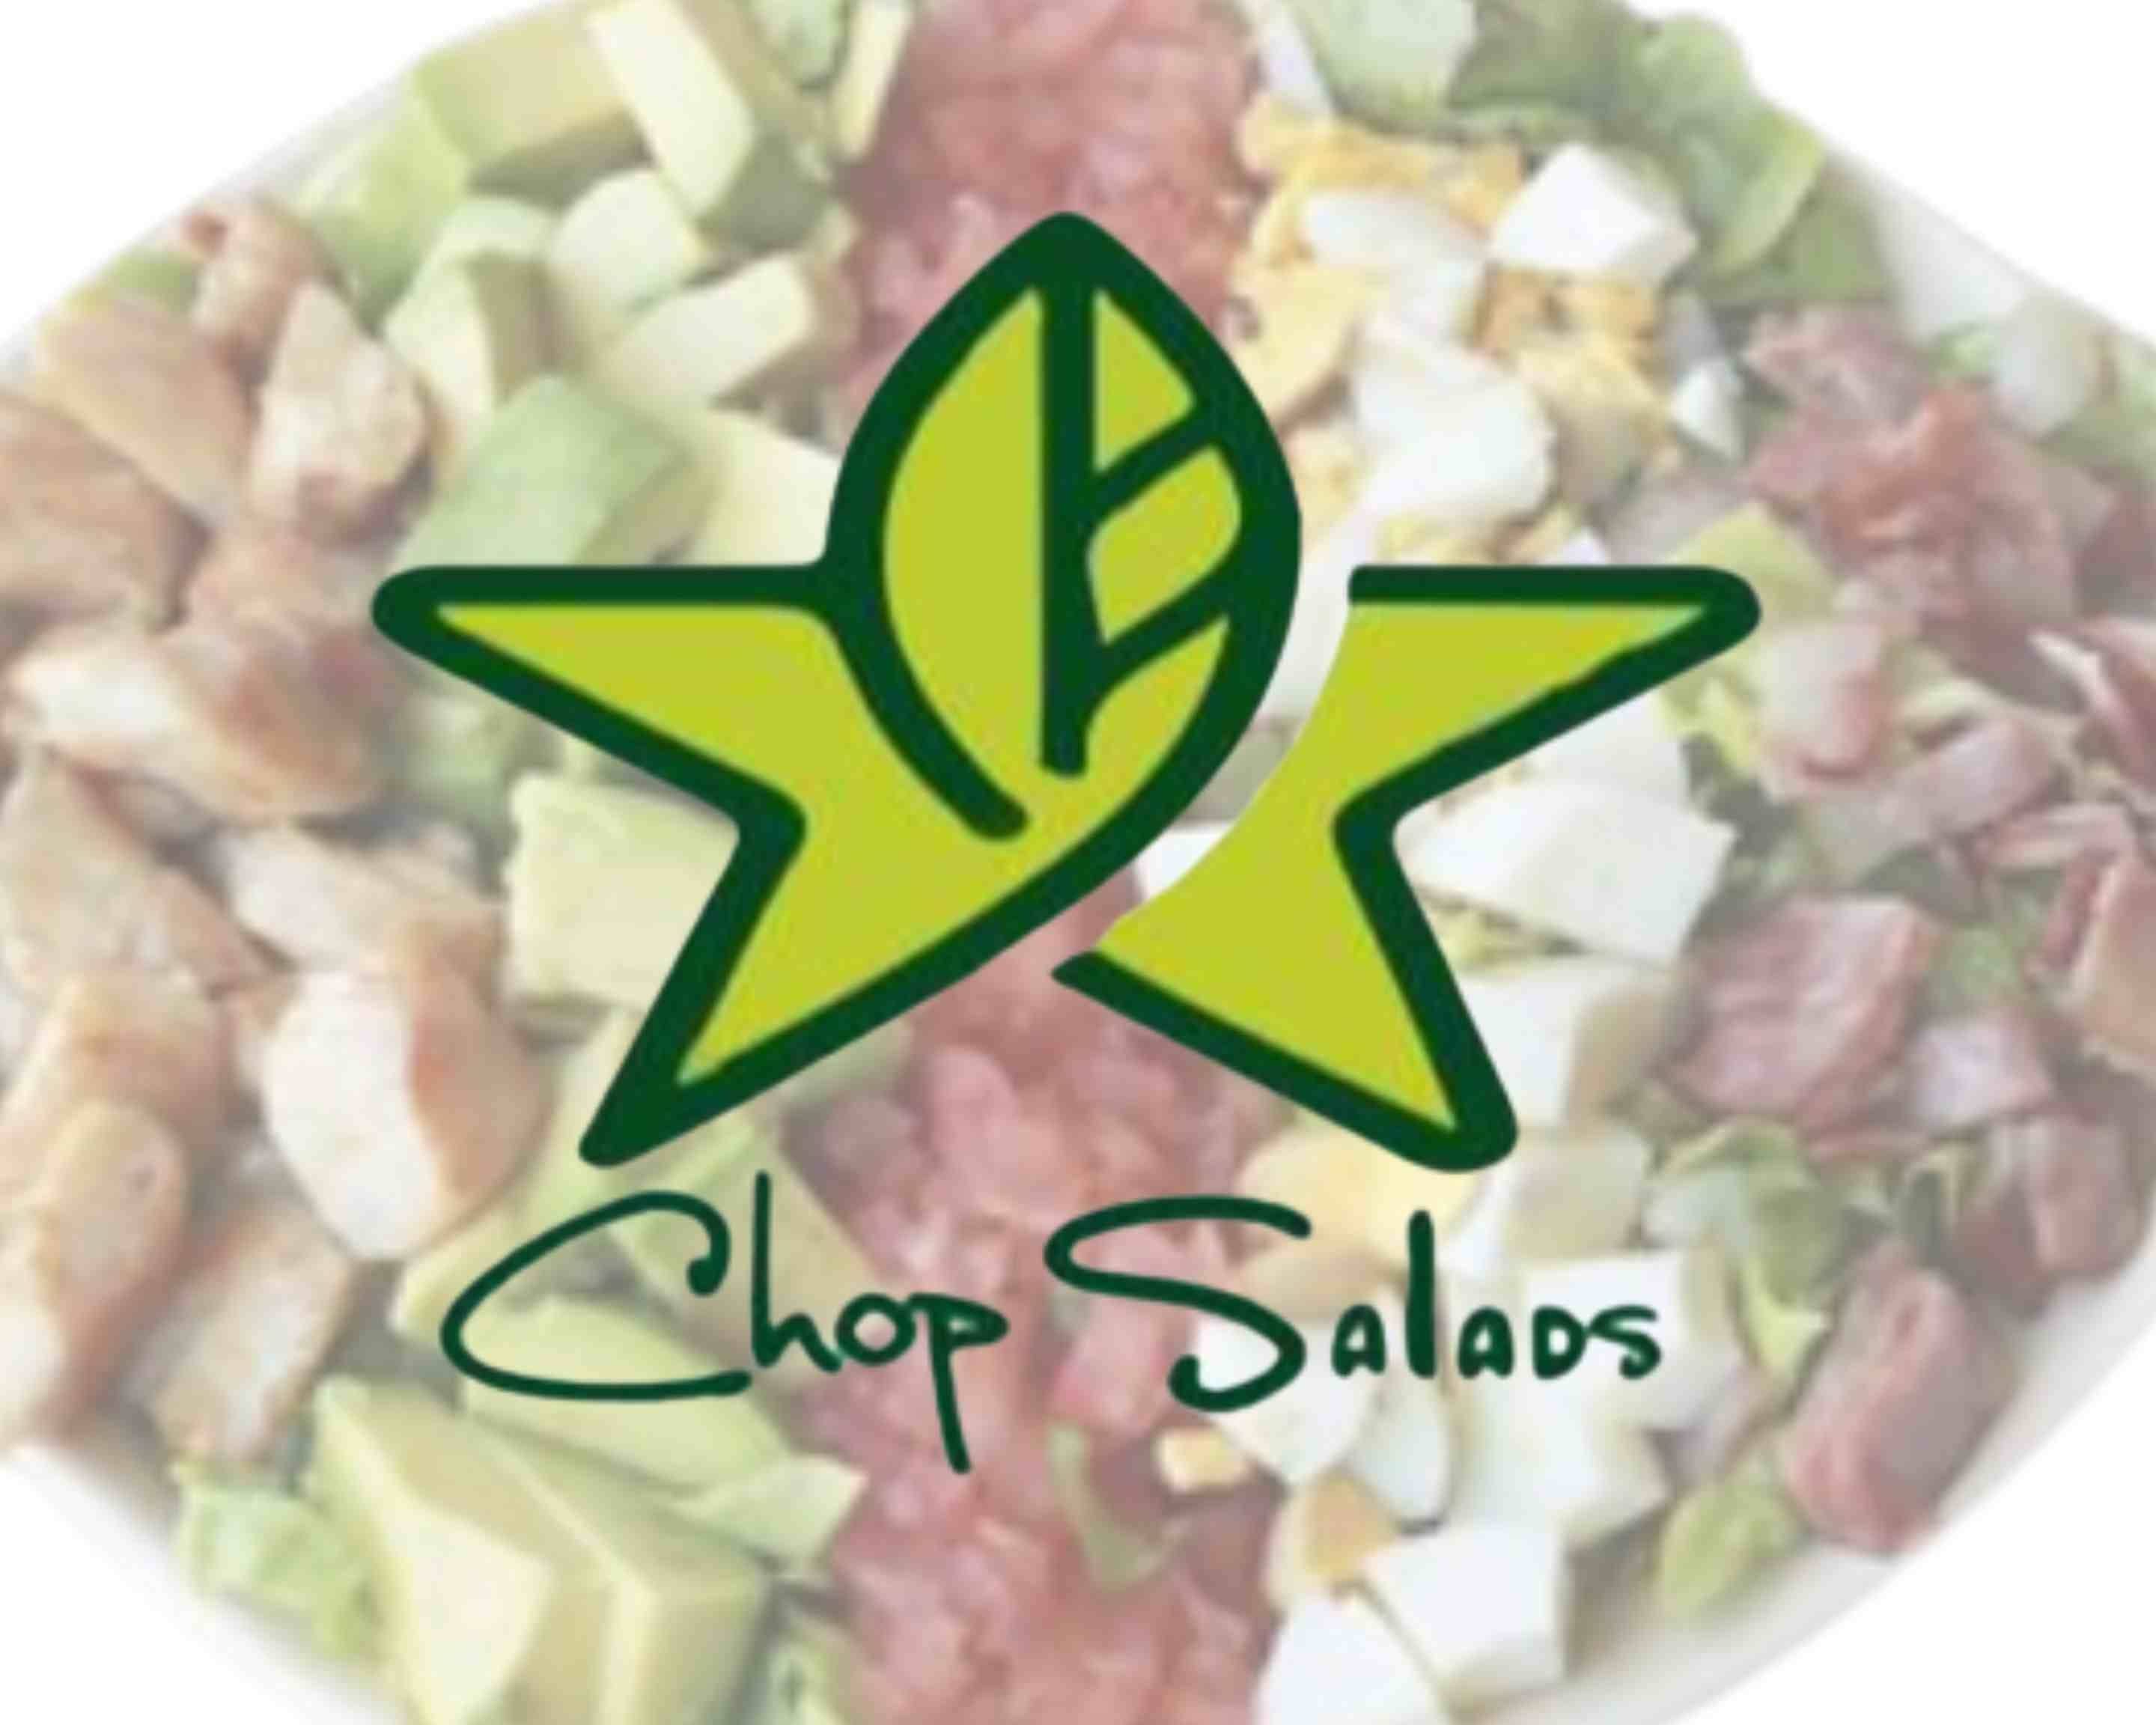 Chop Salads ( | Delivery Guayaquil Menu Eats Prices & Dorado) Uber in 